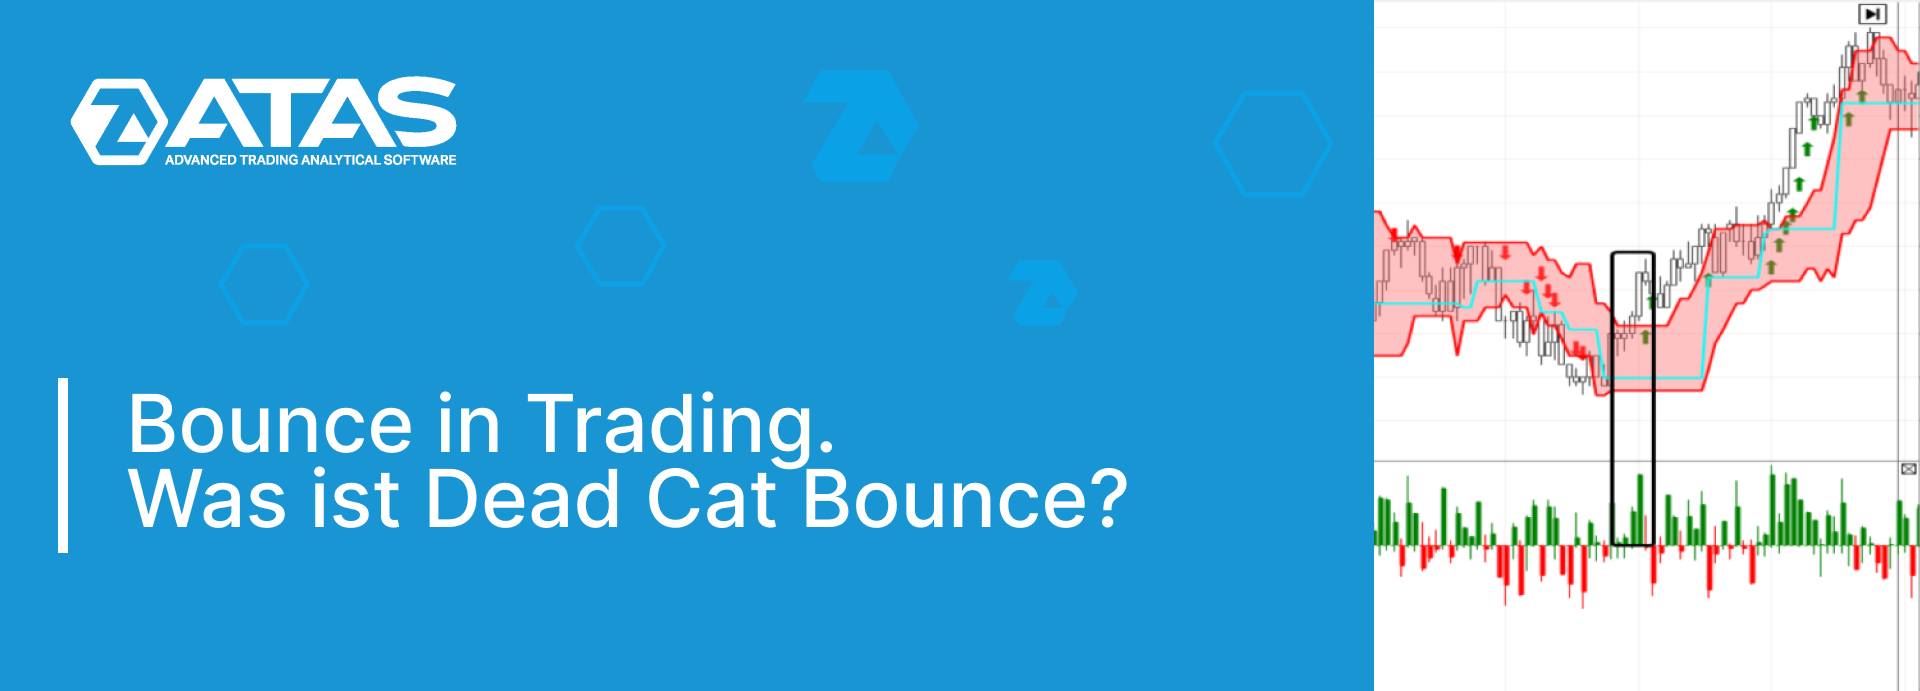 Bounce in Trading. Was ist Dead Cat Bounce?